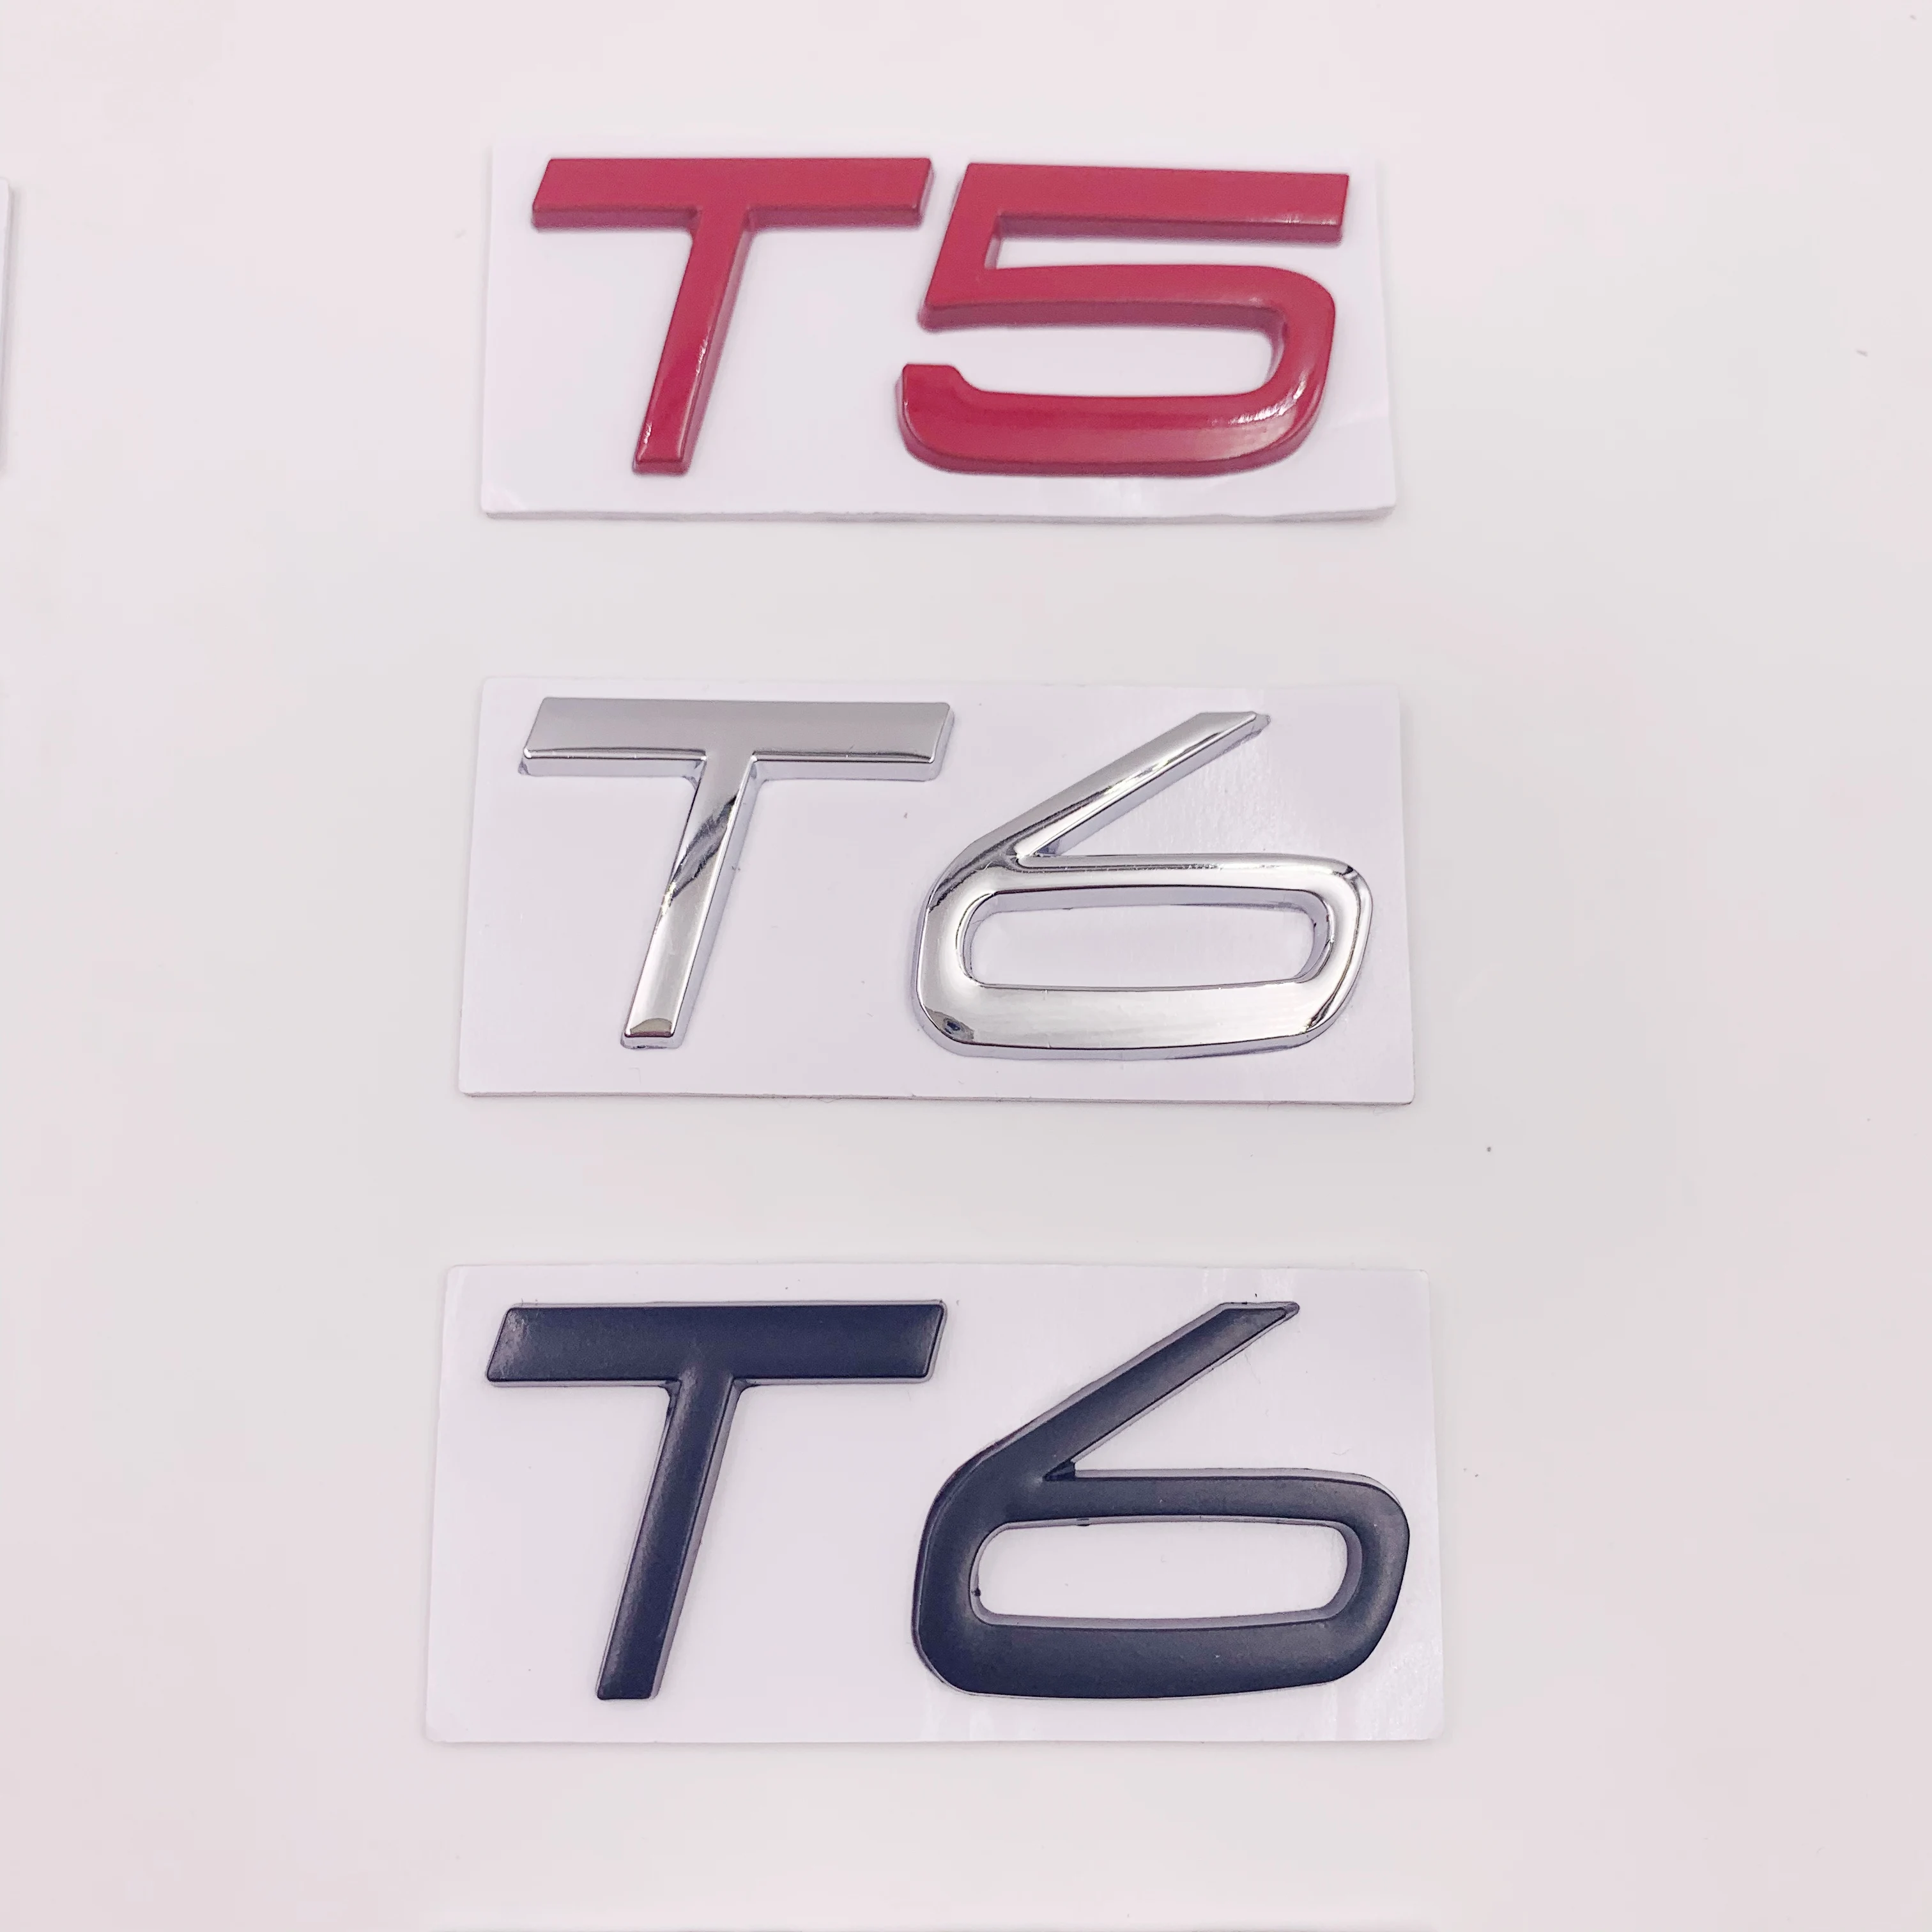 

10pc 3D Metal T5 T6 AWD Letters Emblem Badges Car Sticker Decal Car Styling For Volvo XC60 XC90 S60 S80 S60L V40 V60 Tail Fender